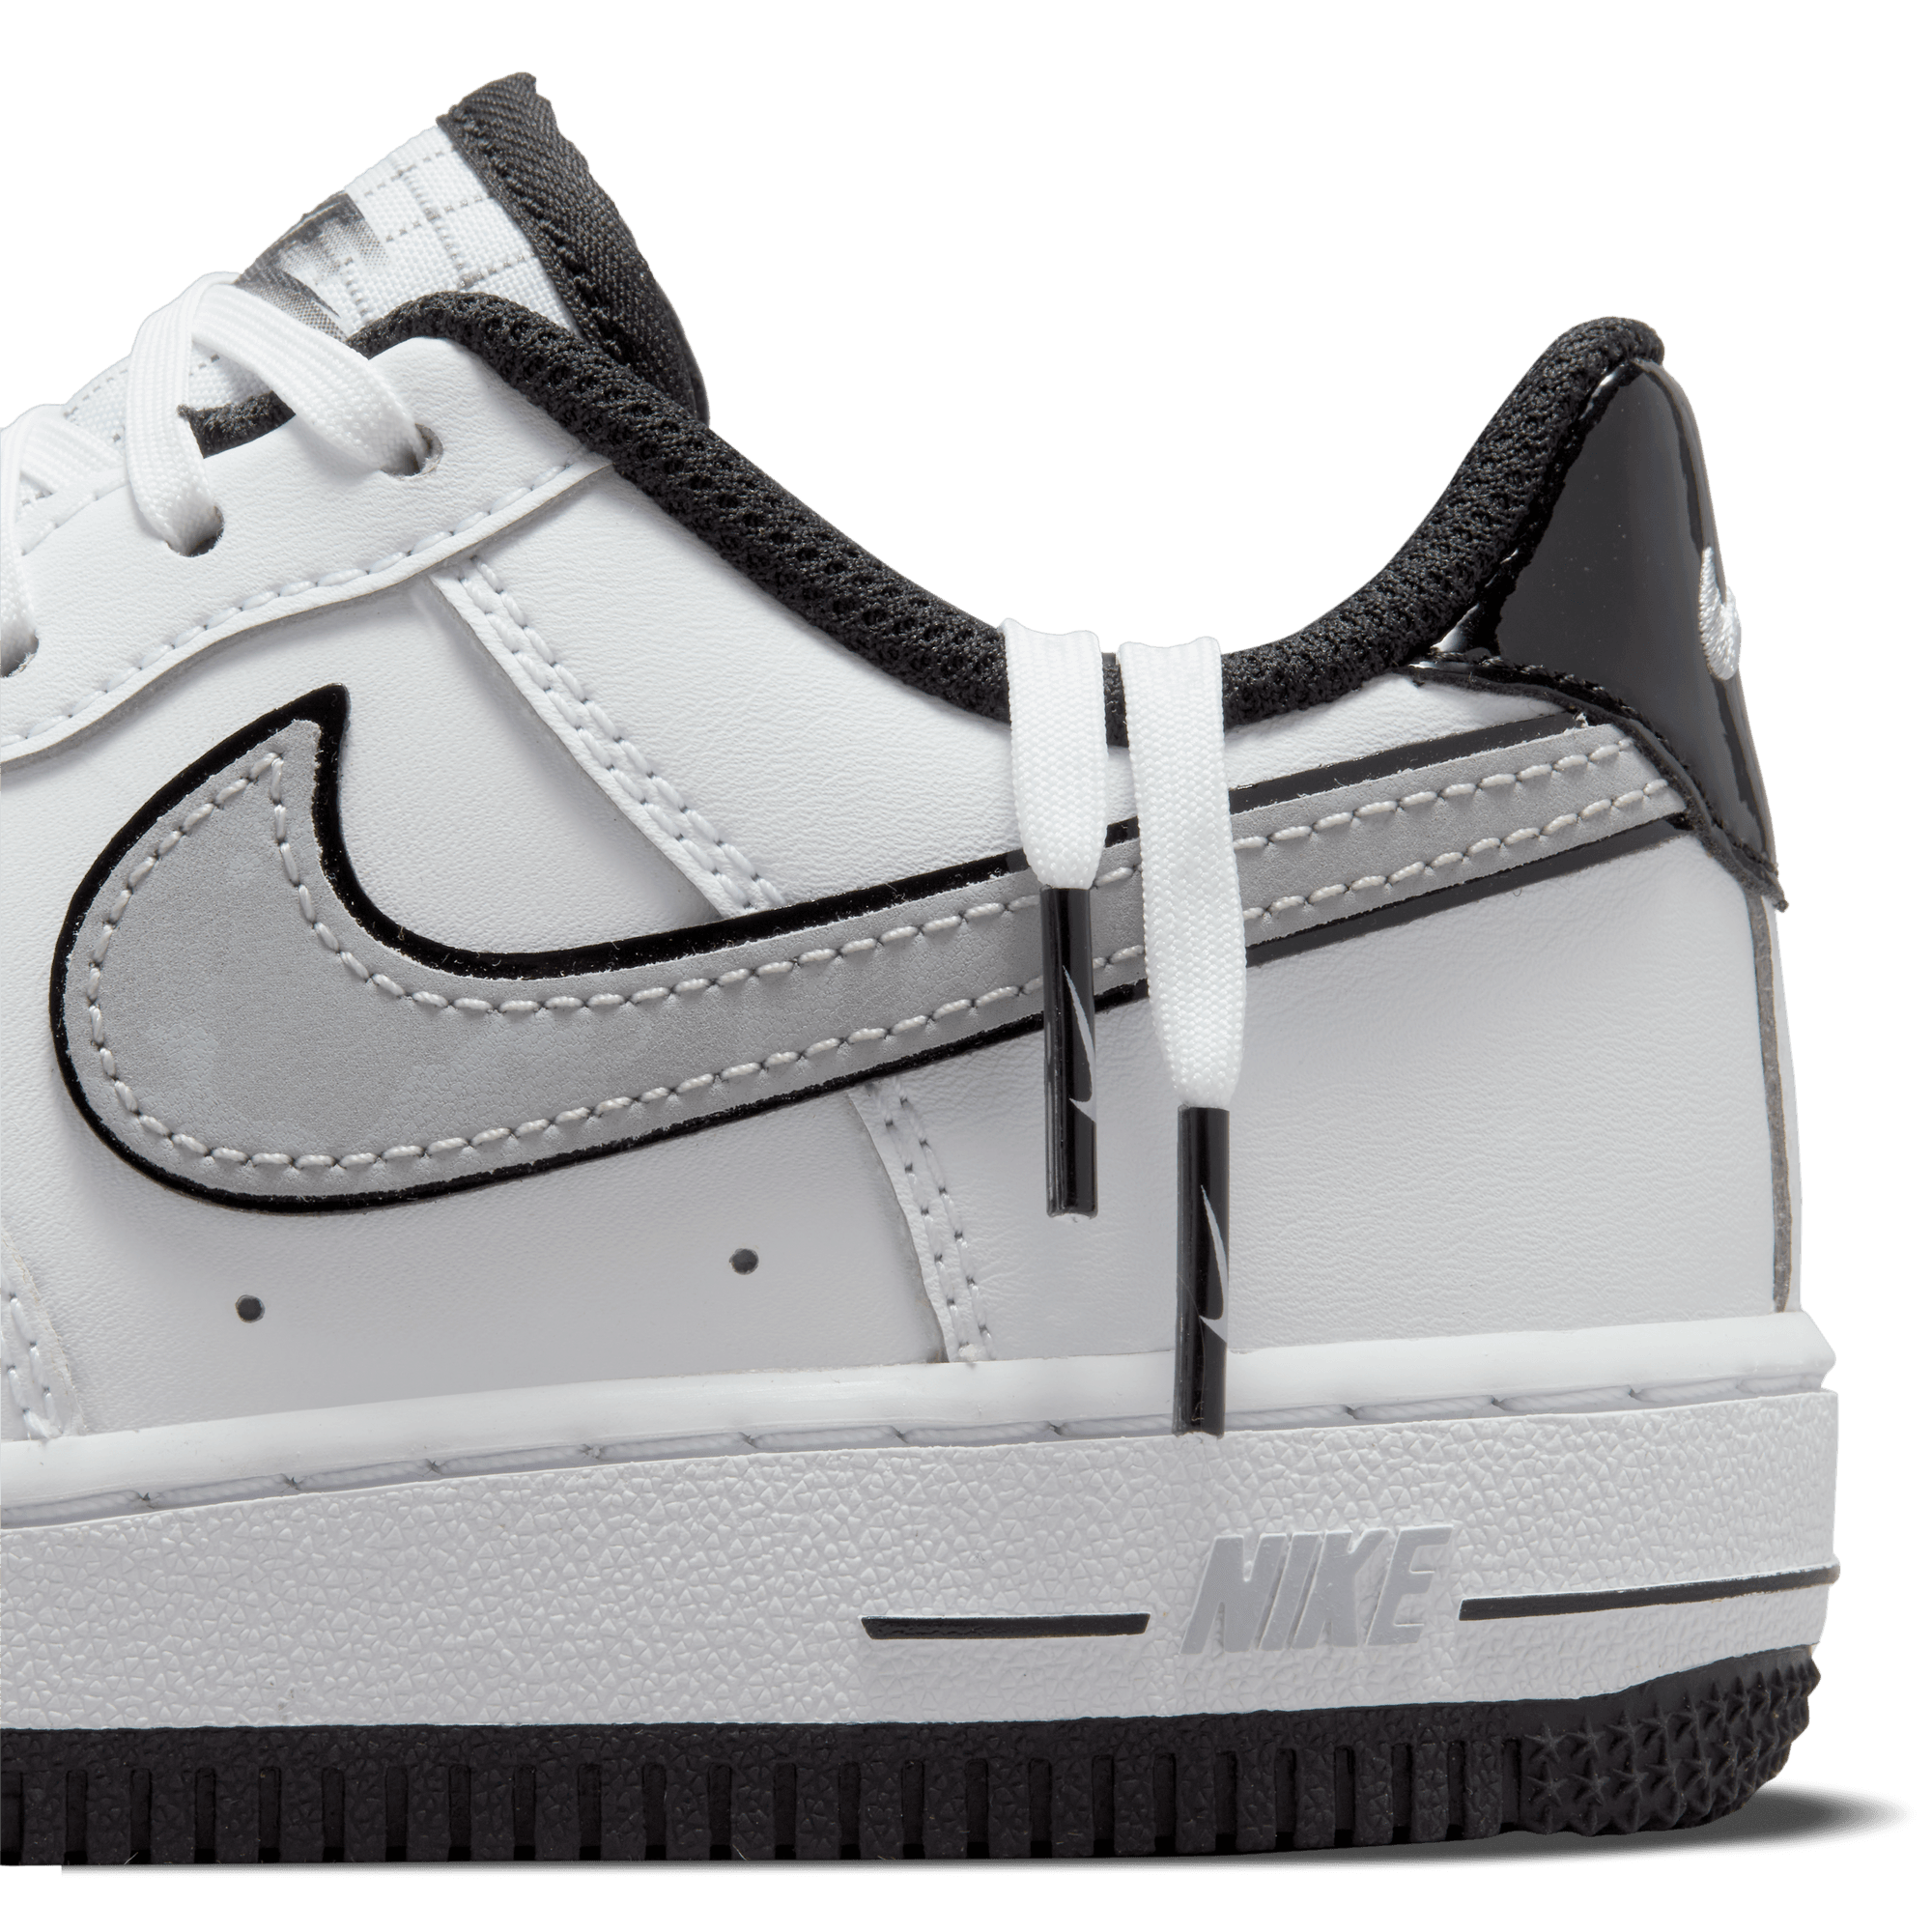 Nike Air Force 1 '07 LV8 Shoes -Men's - GBNY